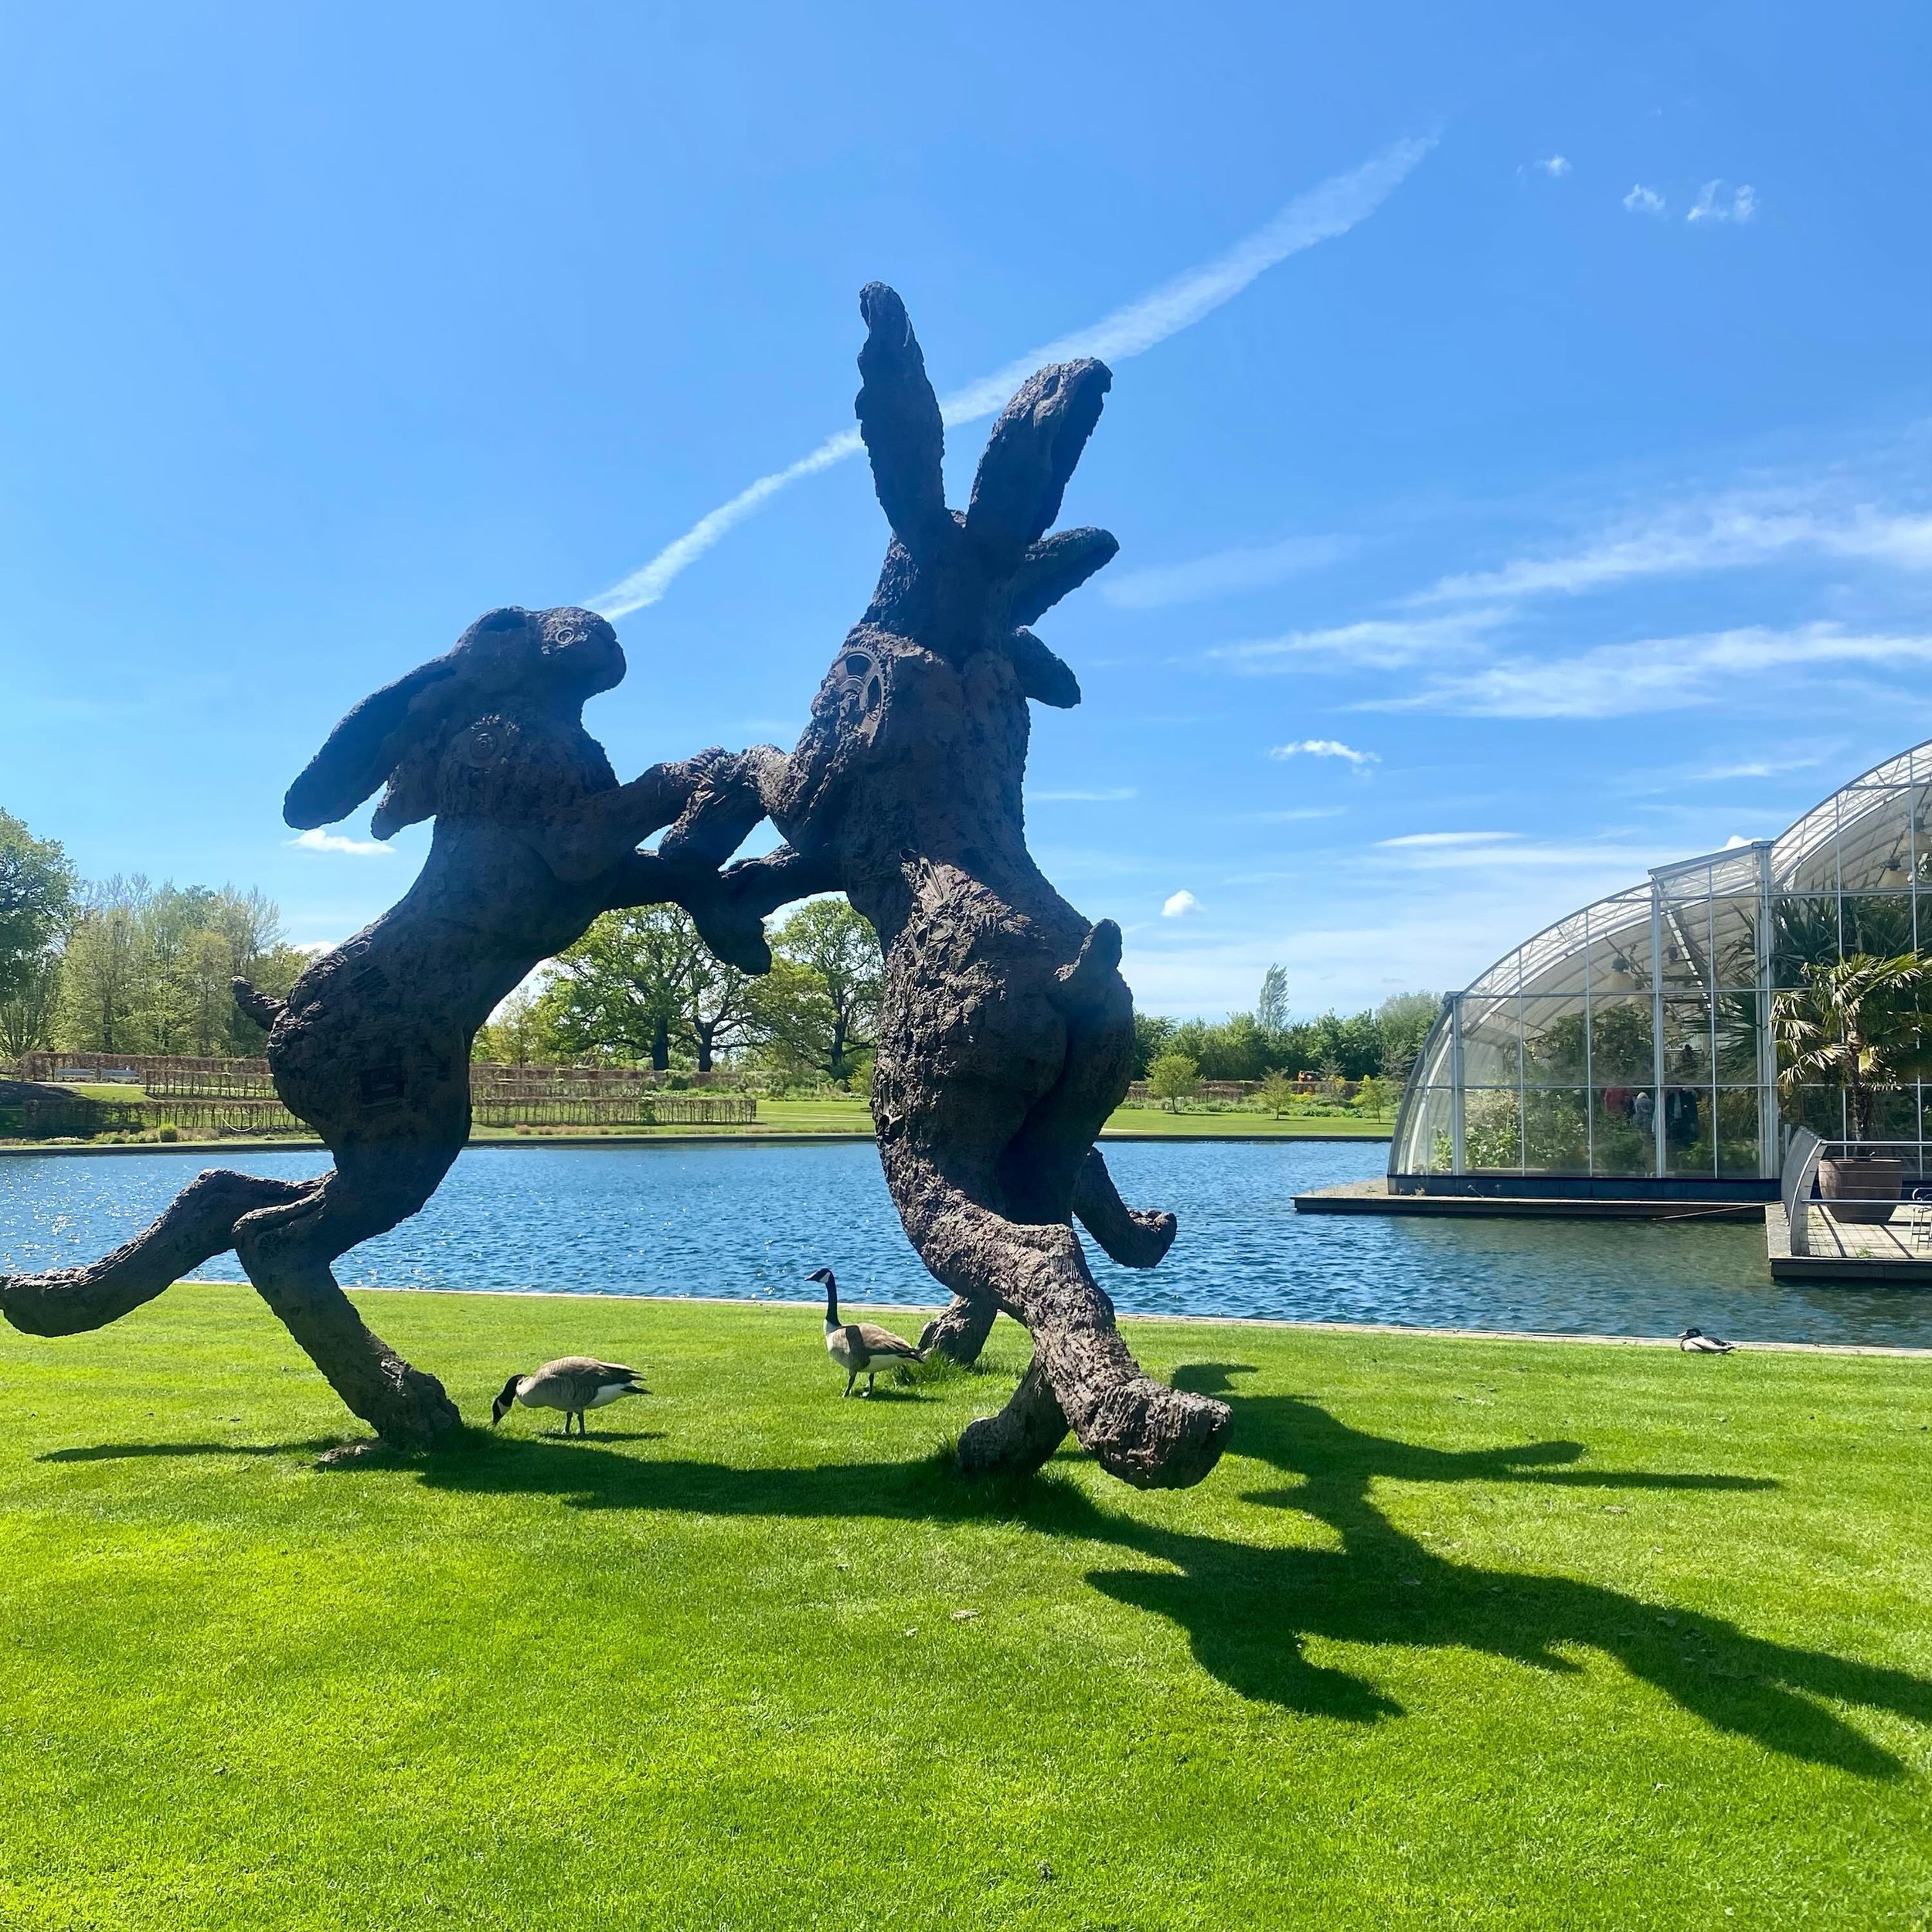 The Dancimg Hares. Wisley. 
The sun broke through, the summer came to say hello, briefly. 
We all smiled at each other, happy in friendship and beauty. 
So much better now - and you were there x 

.
.
.
#wisley #wisleygardens #rhs #flowers #beautiful